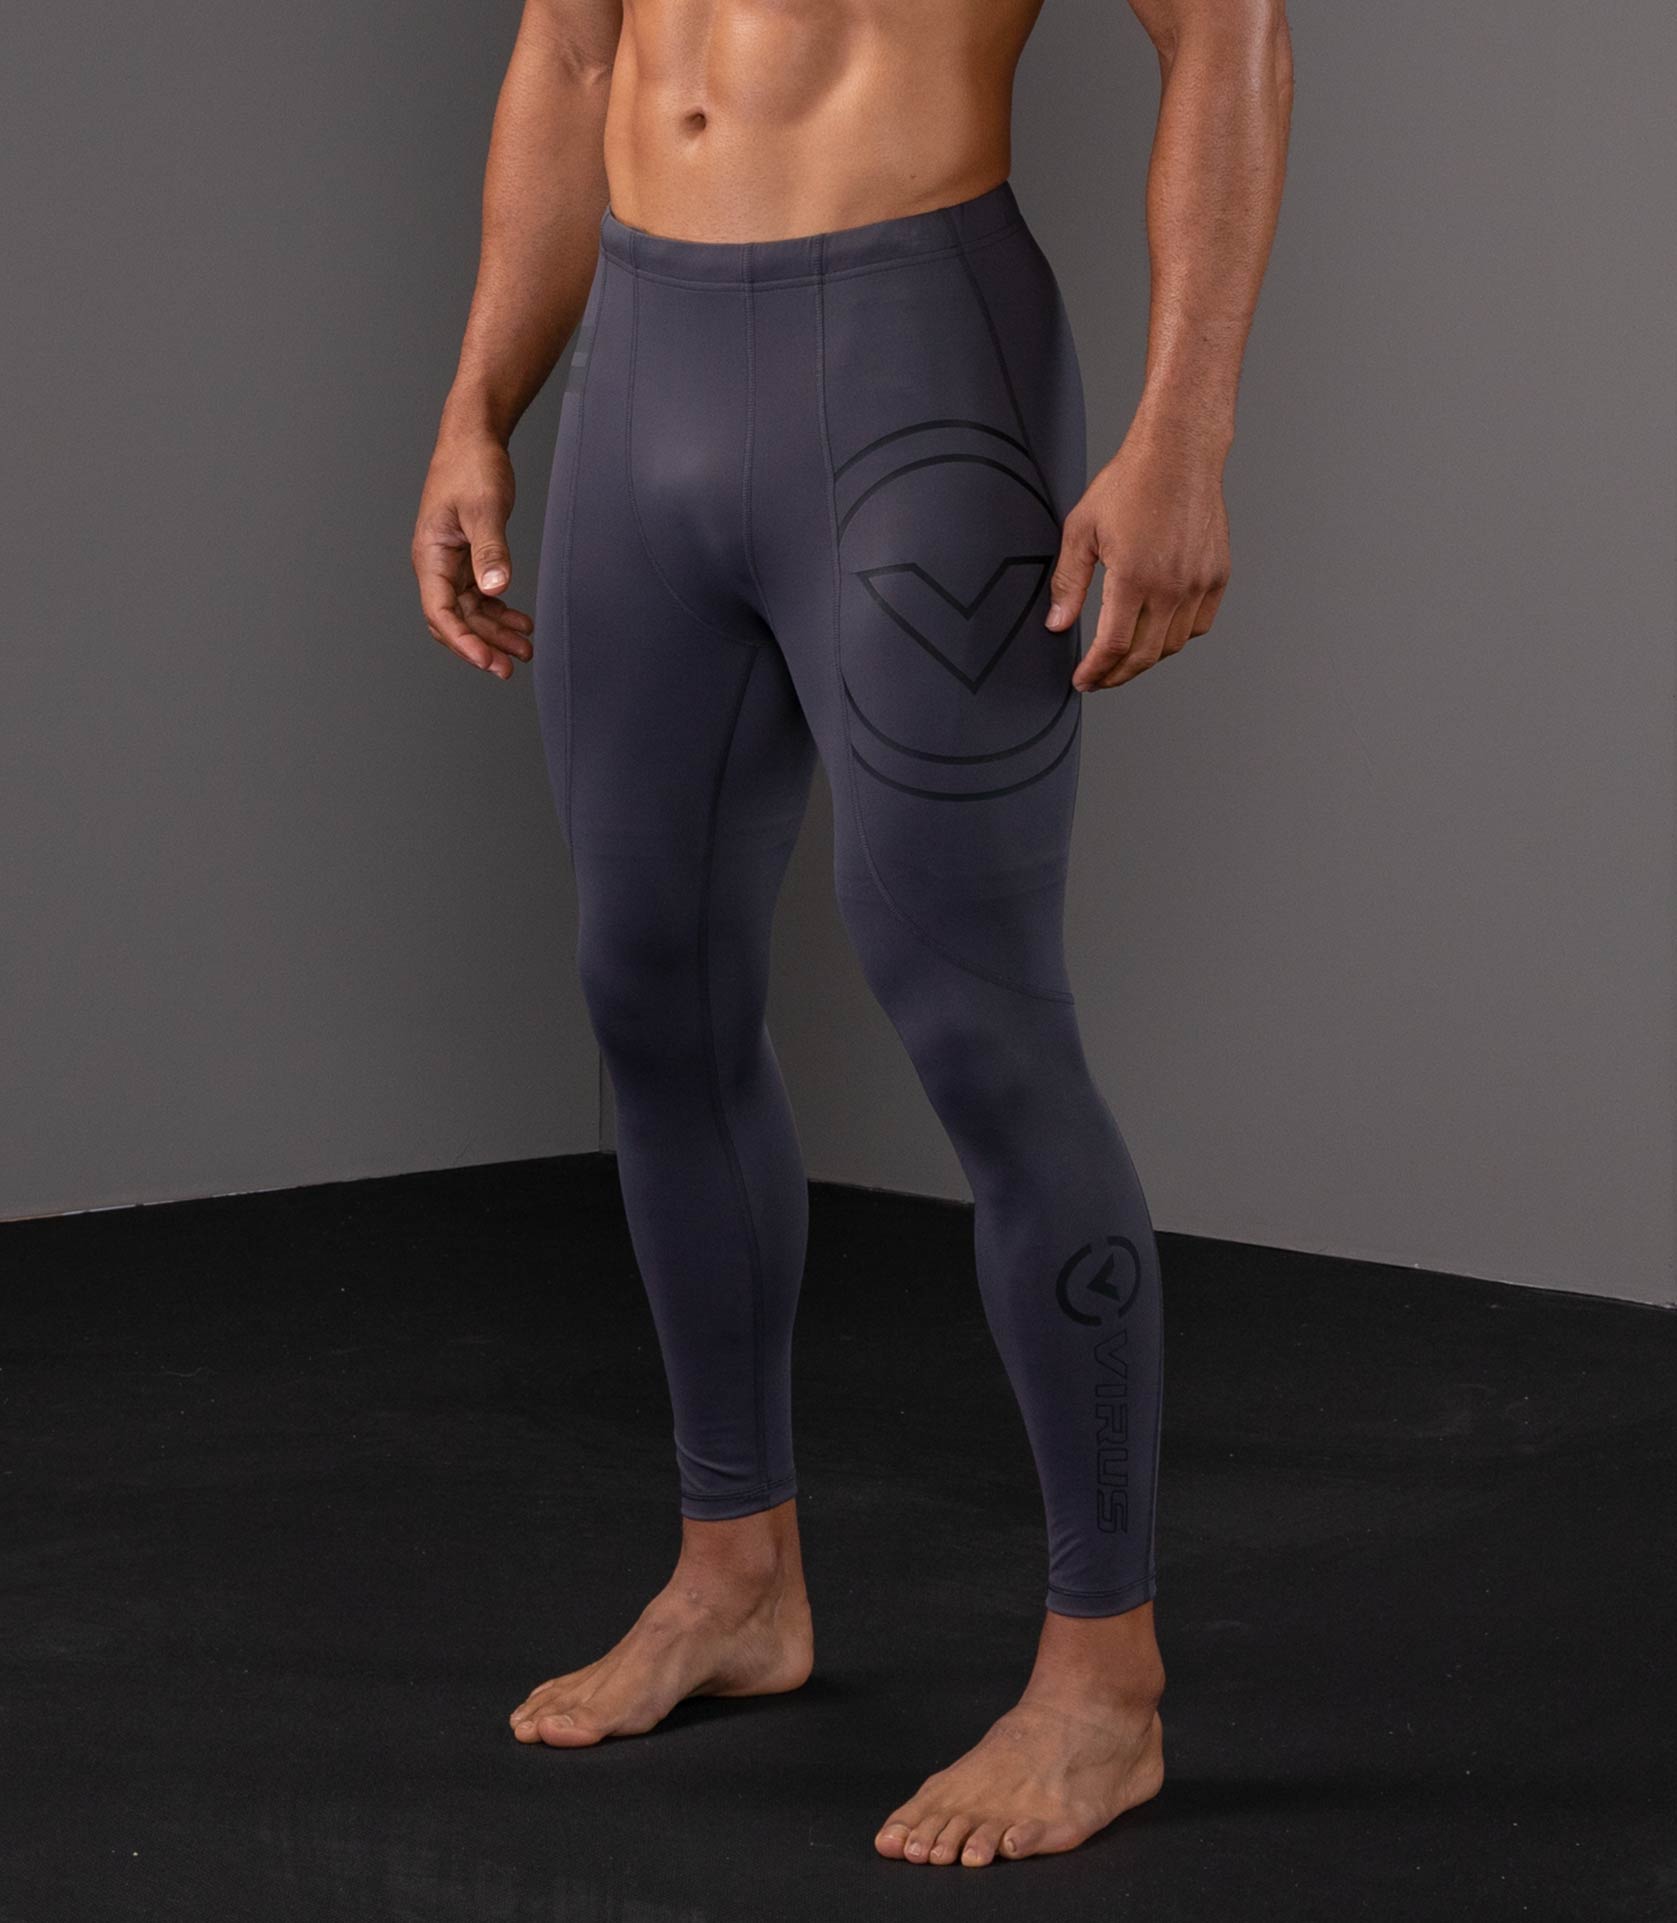 Men's Compression Pants Male Tights Leggings for Running Gym Sport Fitness  Quick Dry Fit Joggings Workout